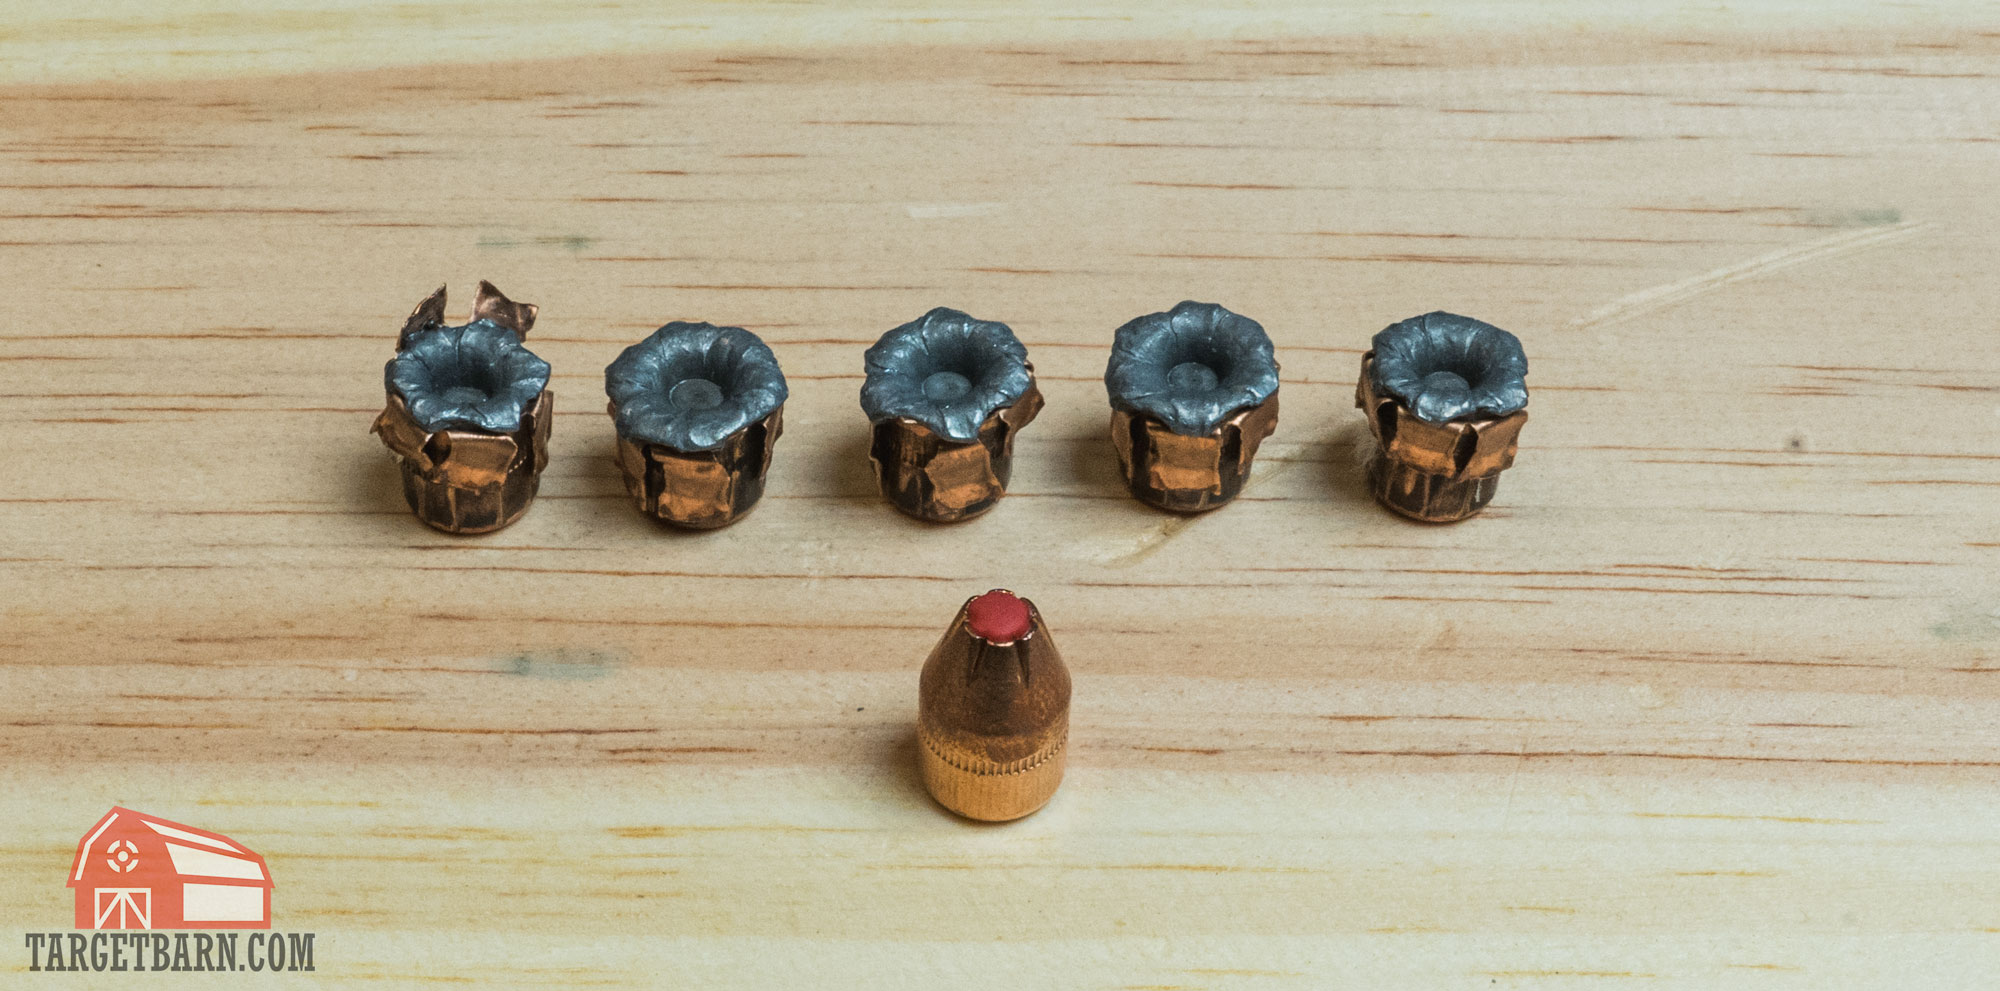 5 expanded hornady critical defense .38 special +p 110gr ftx rounds after being fired in gel and an unfired ftx bullet